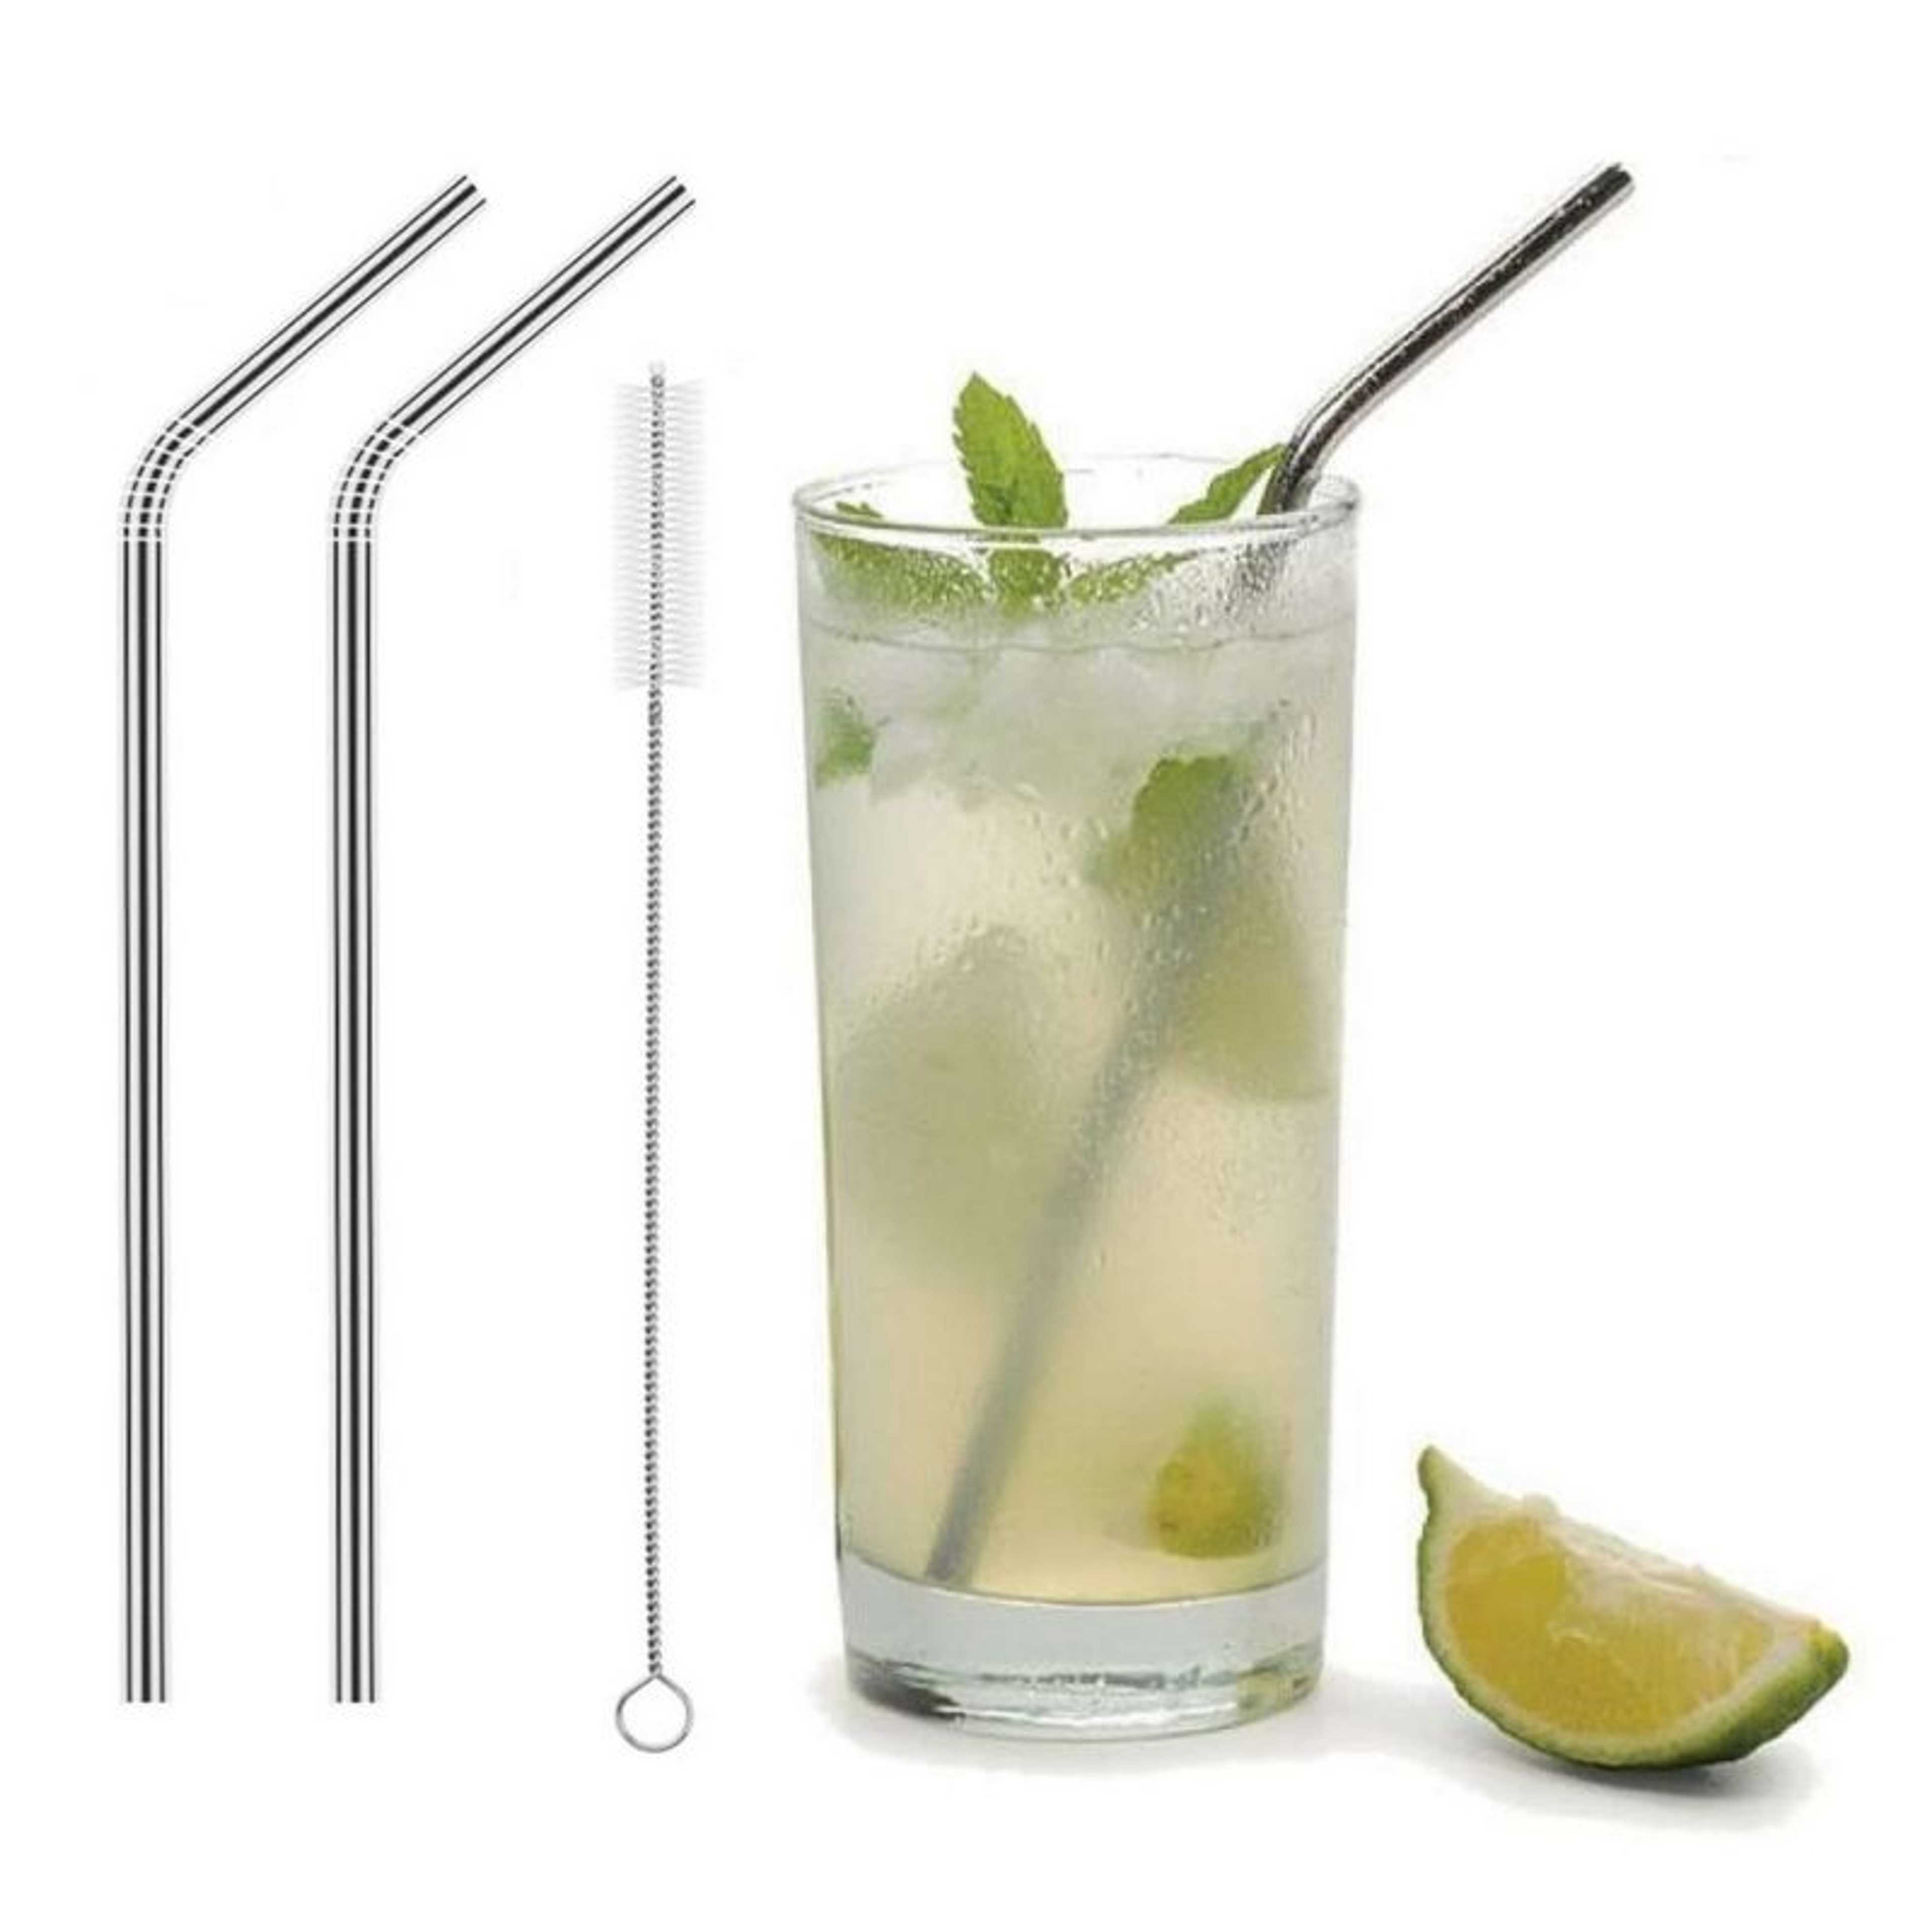 Stainless Steel Reusable Drinking Straws With Cleaning Brush